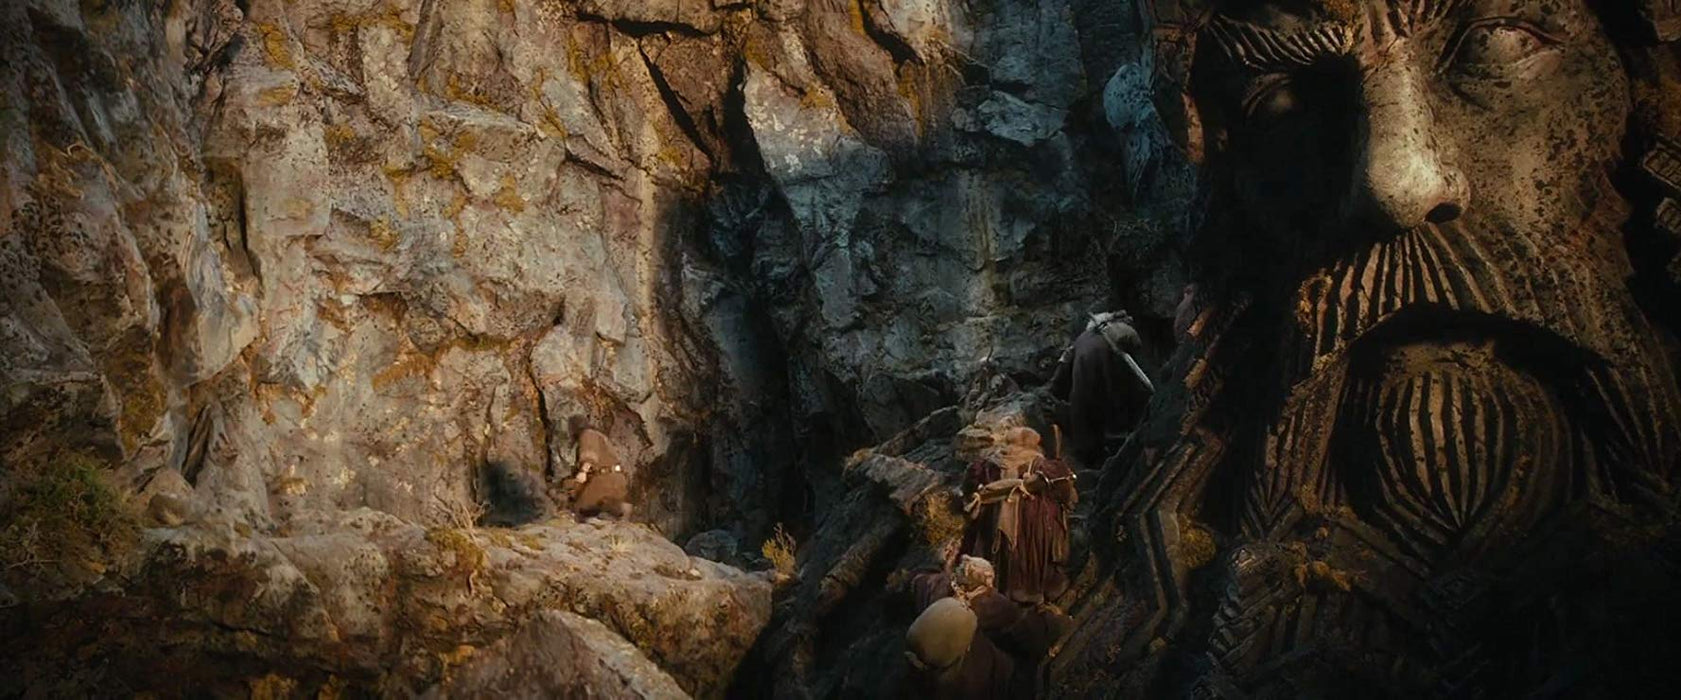 The Hobbit: The Desolation of Smaug 3D [3D + 2D Blu-ray + Digital]